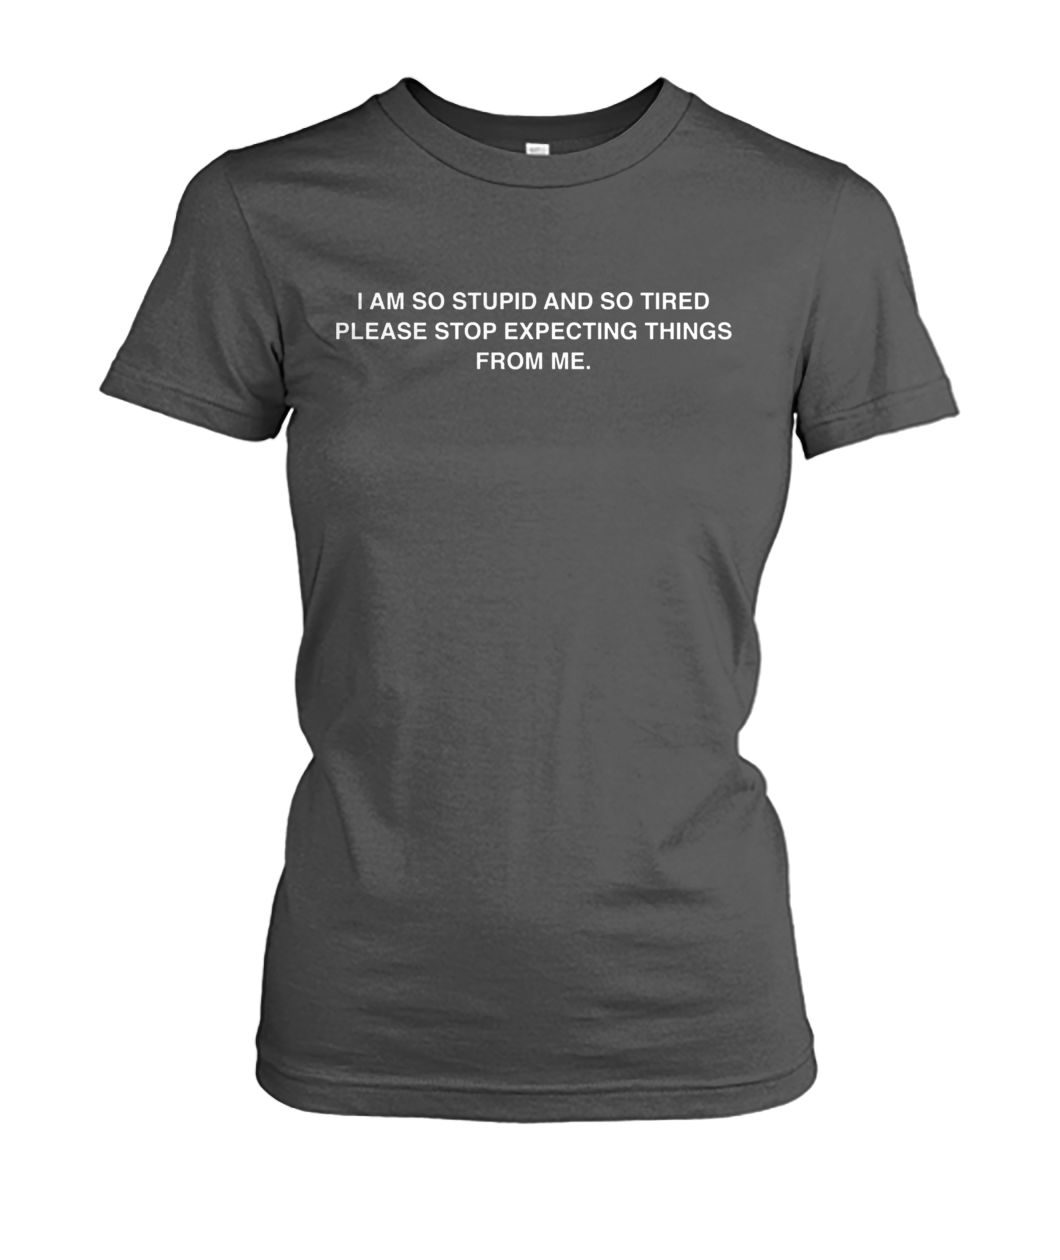 I am so stupid and so tired please stop expecting things from me women's crew tee